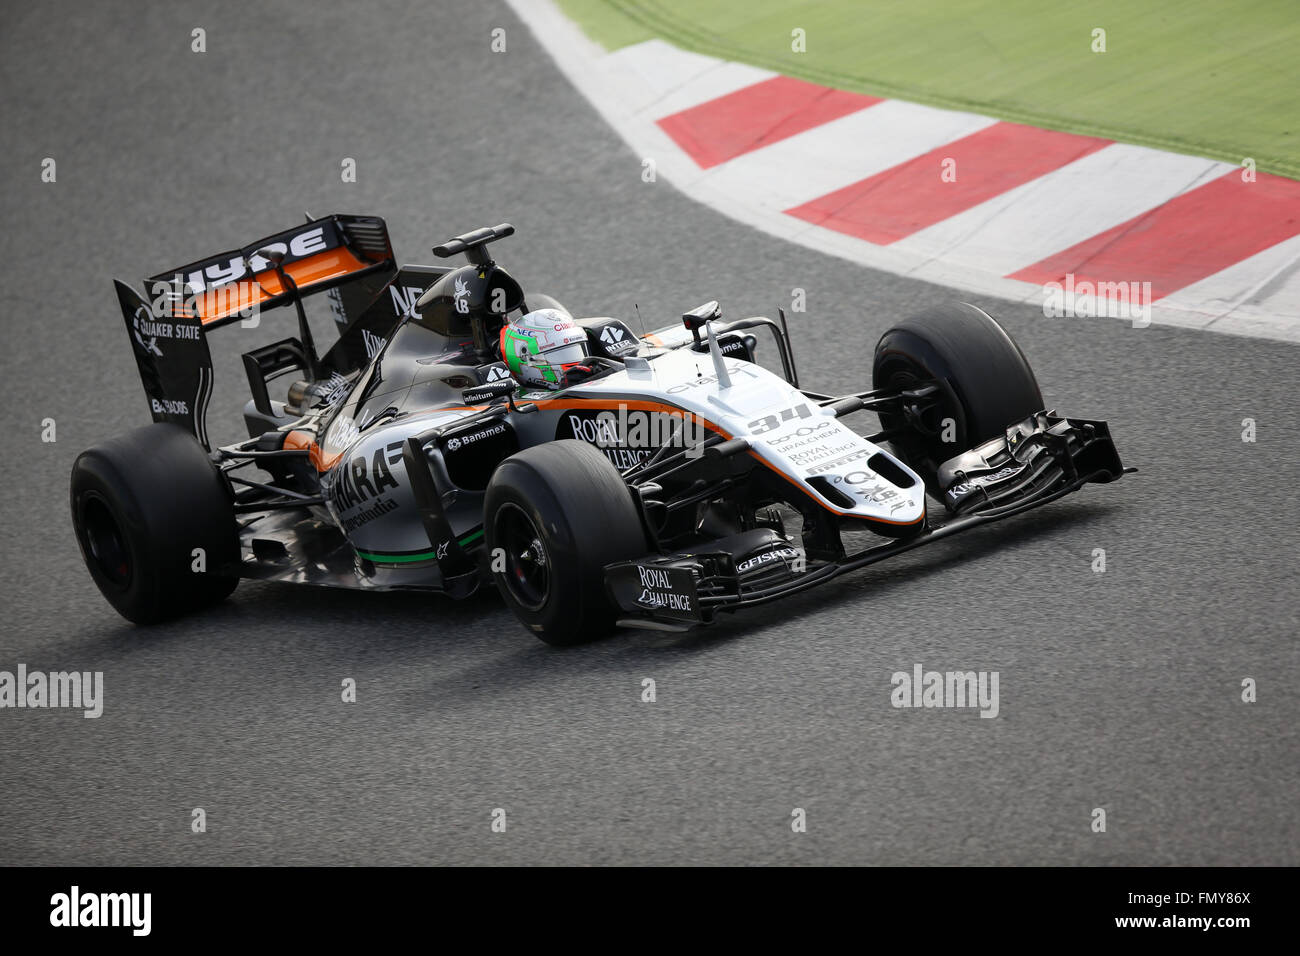 Formula One testdriver Alfonso Celis of Force India steers the new car during a training session for the upcoming Formula One season at the Circuit de Barcelona - Catalunya in Barcelona, Spain, 22 February 2016. Photo: Jens Buettner/dpa Stock Photo